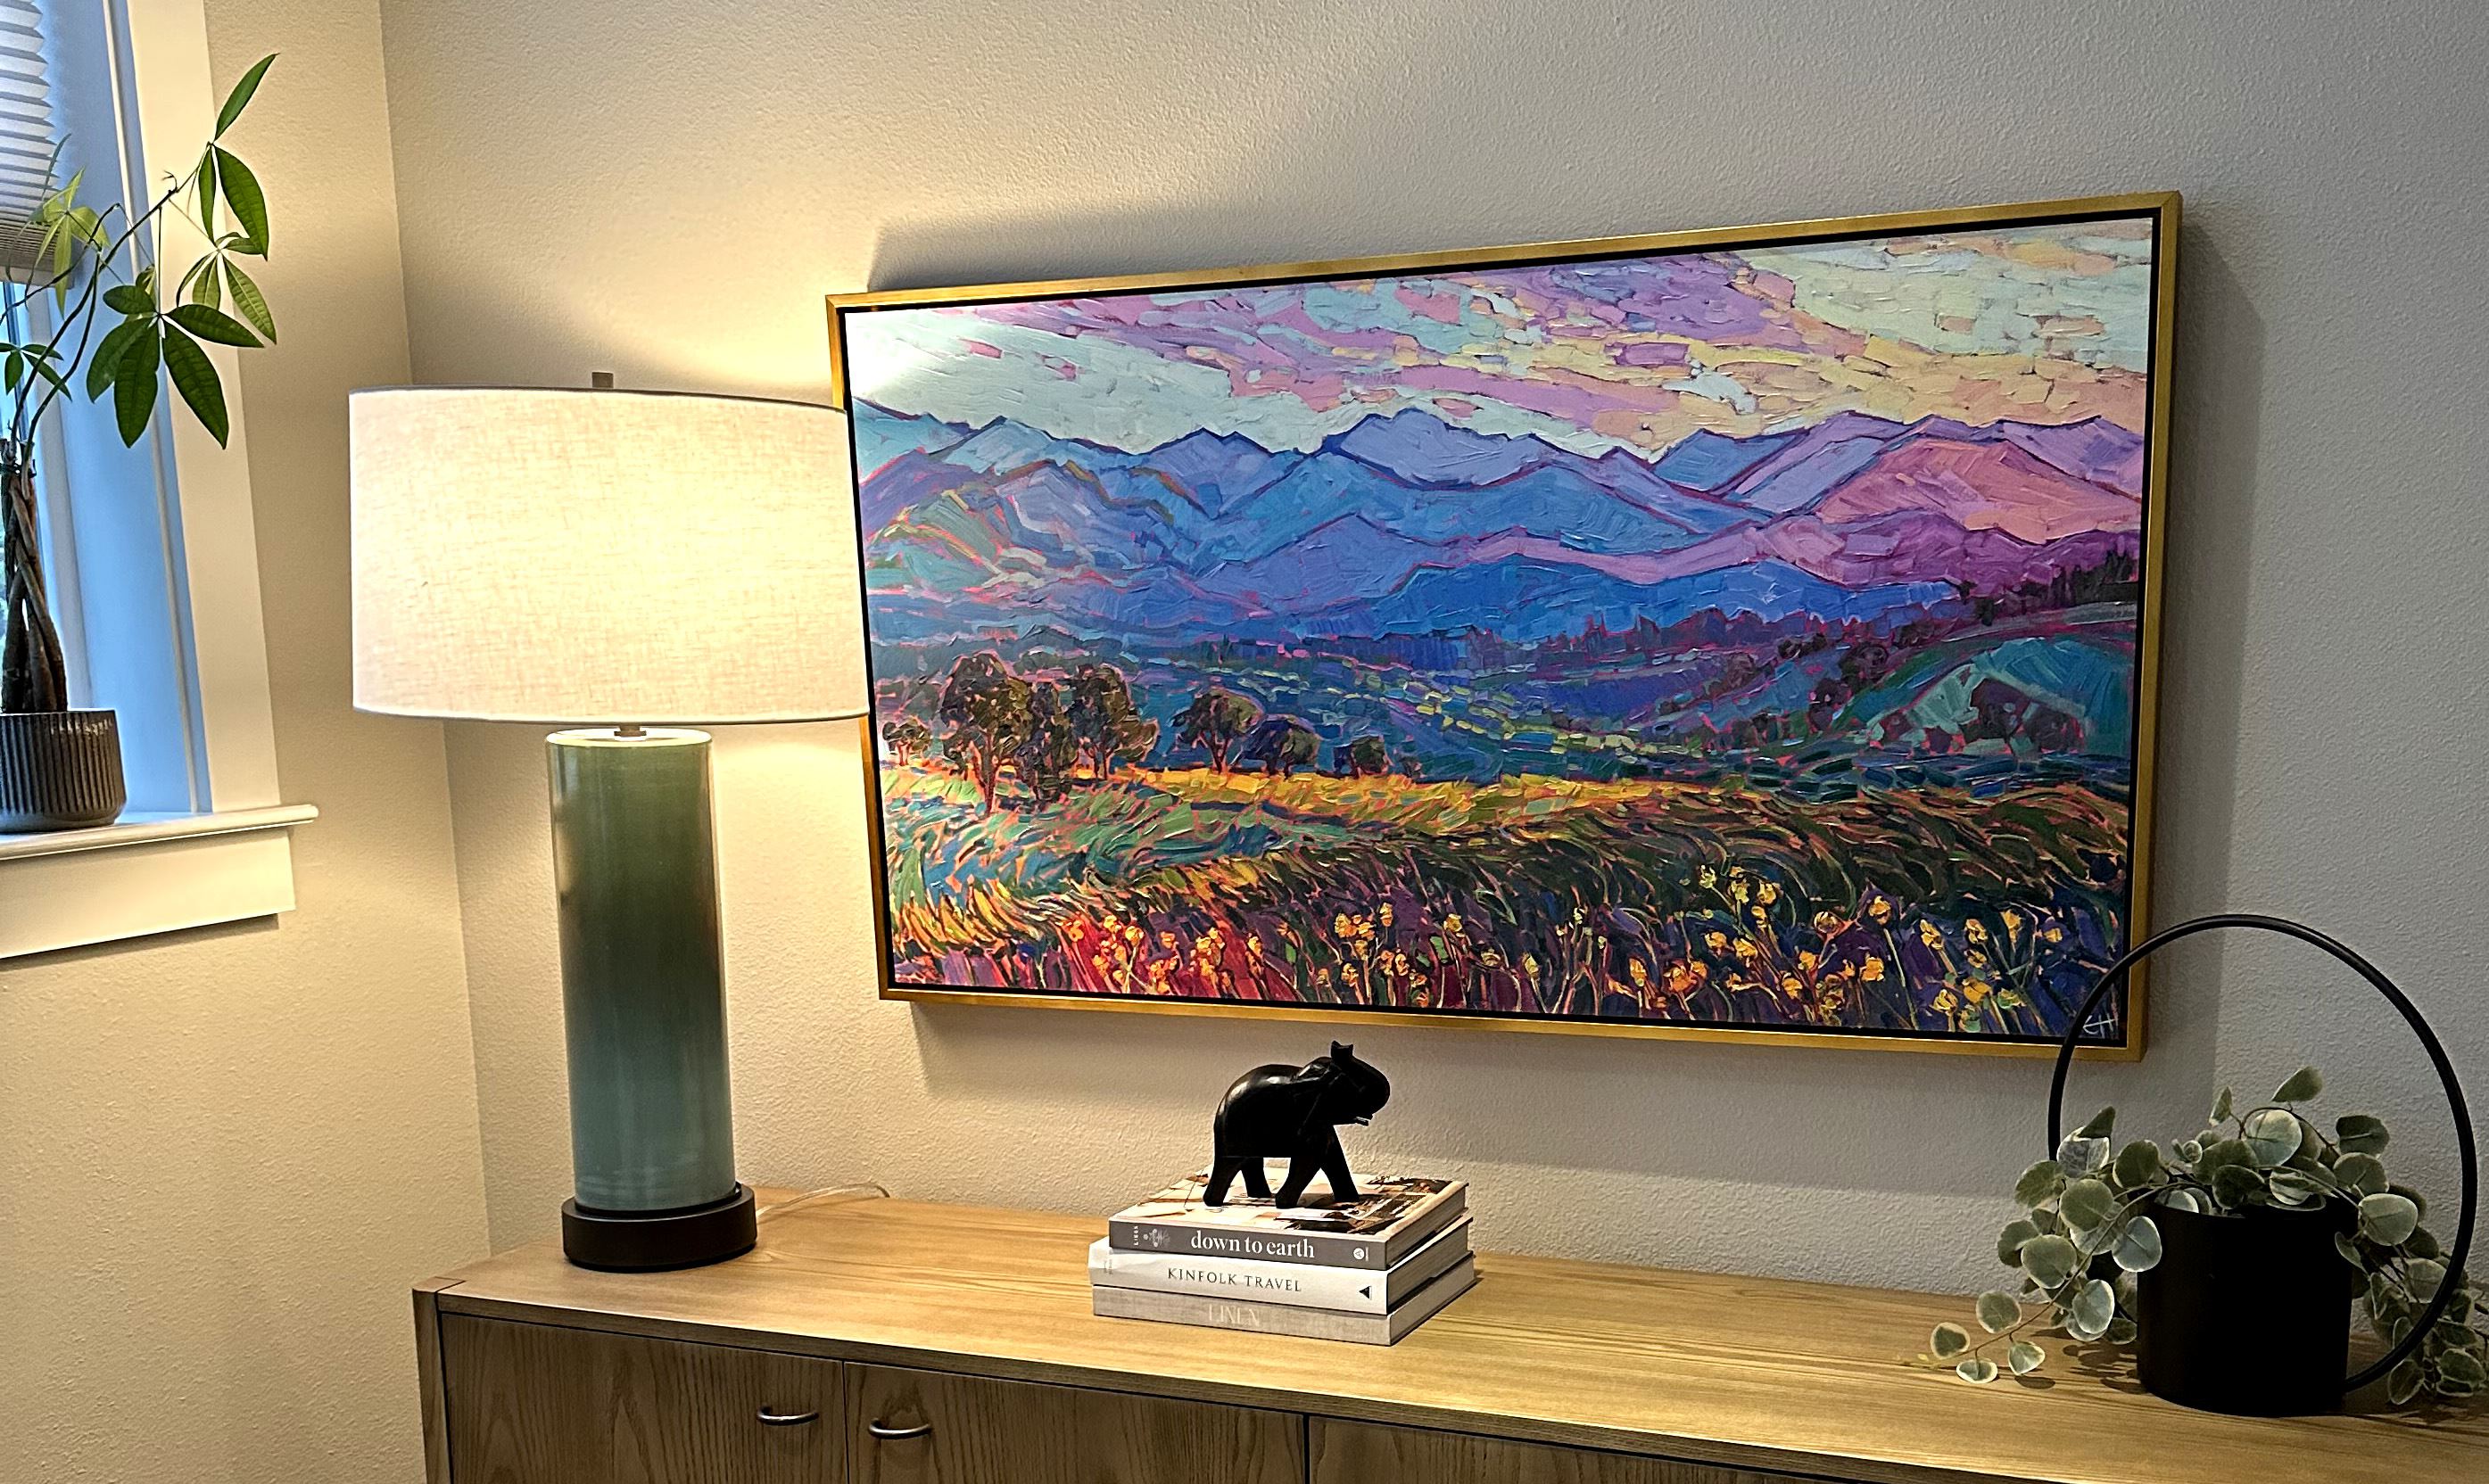 How to Display Art on Your TV